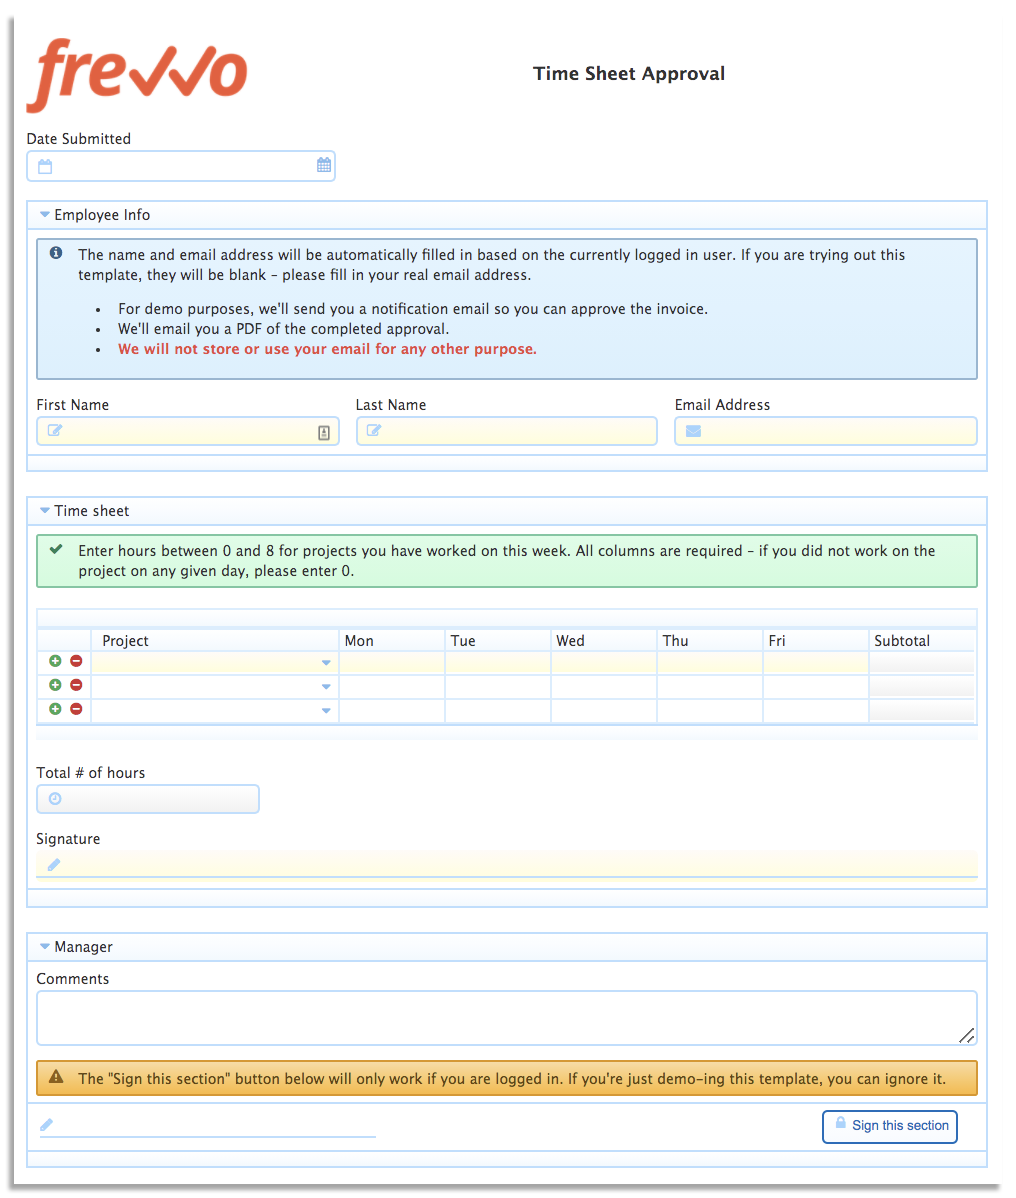 Timesheet approval form